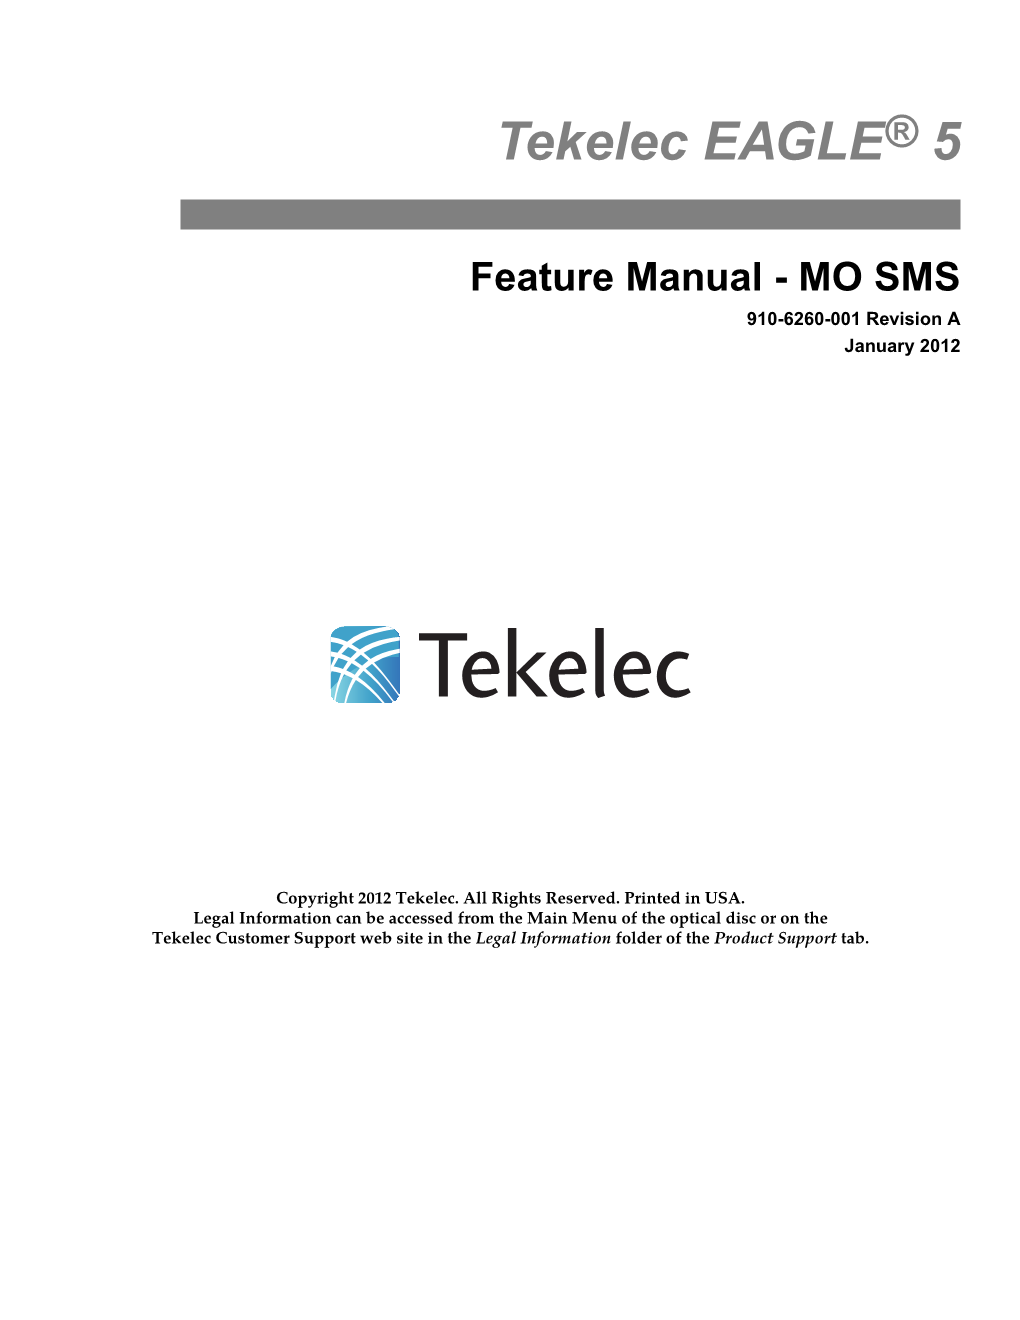 Feature Manual - MO SMS 910-6260-001 Revision a January 2012